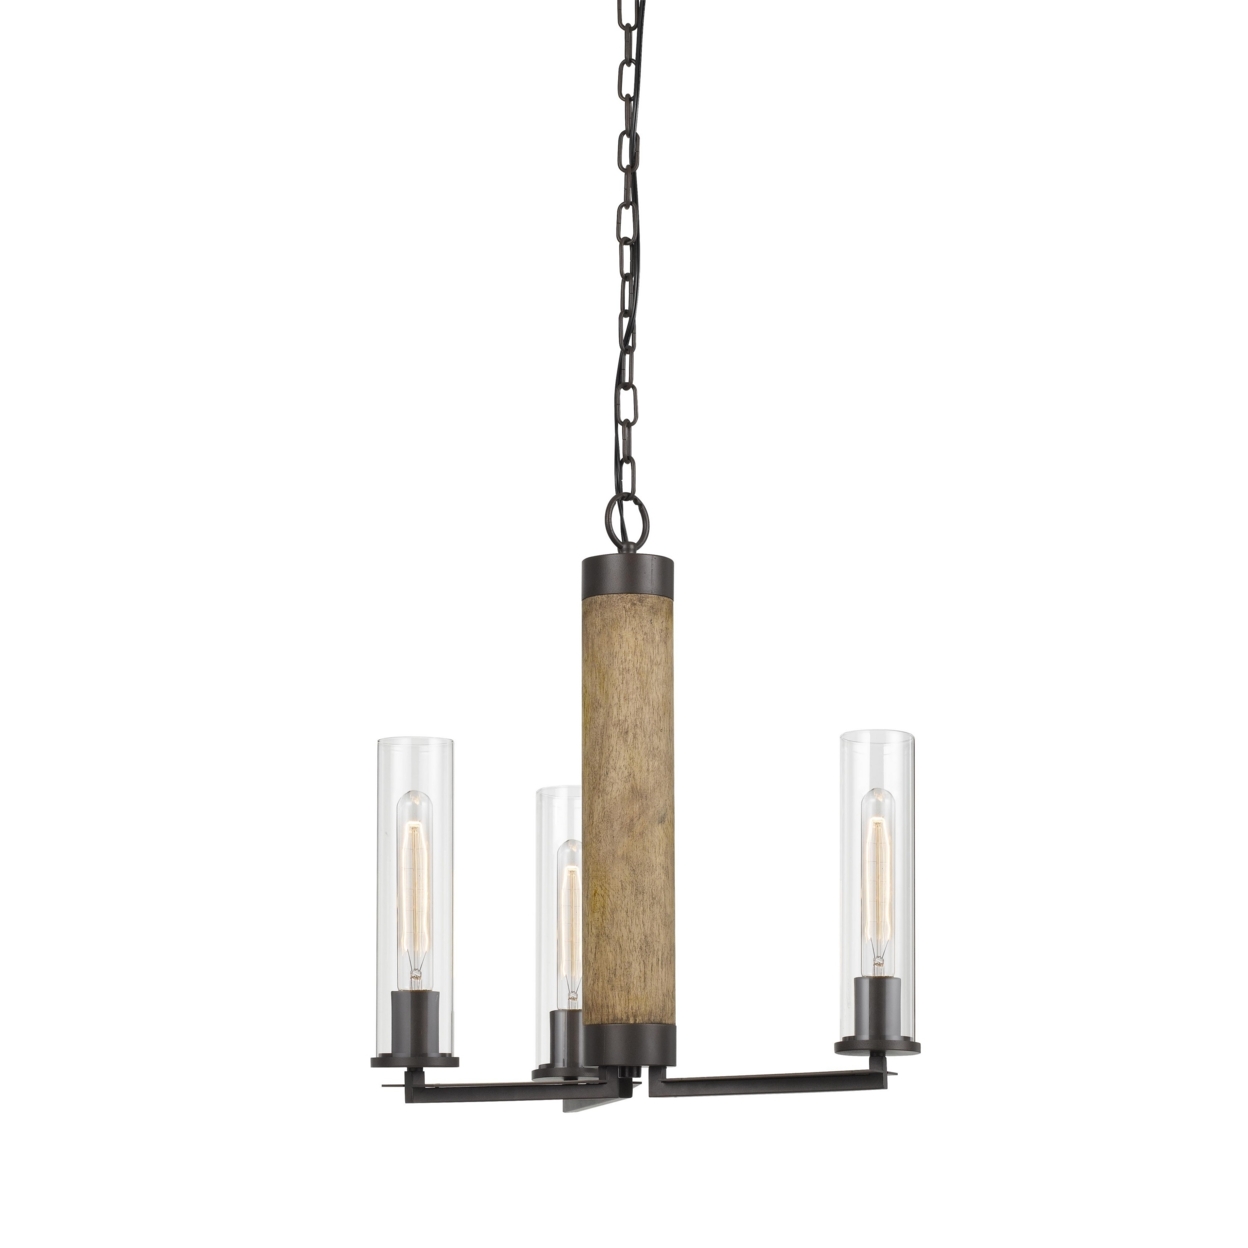 3 Glass Shade Metal And Wooden Chandelier With Chain, Black And Clear- Saltoro Sherpi